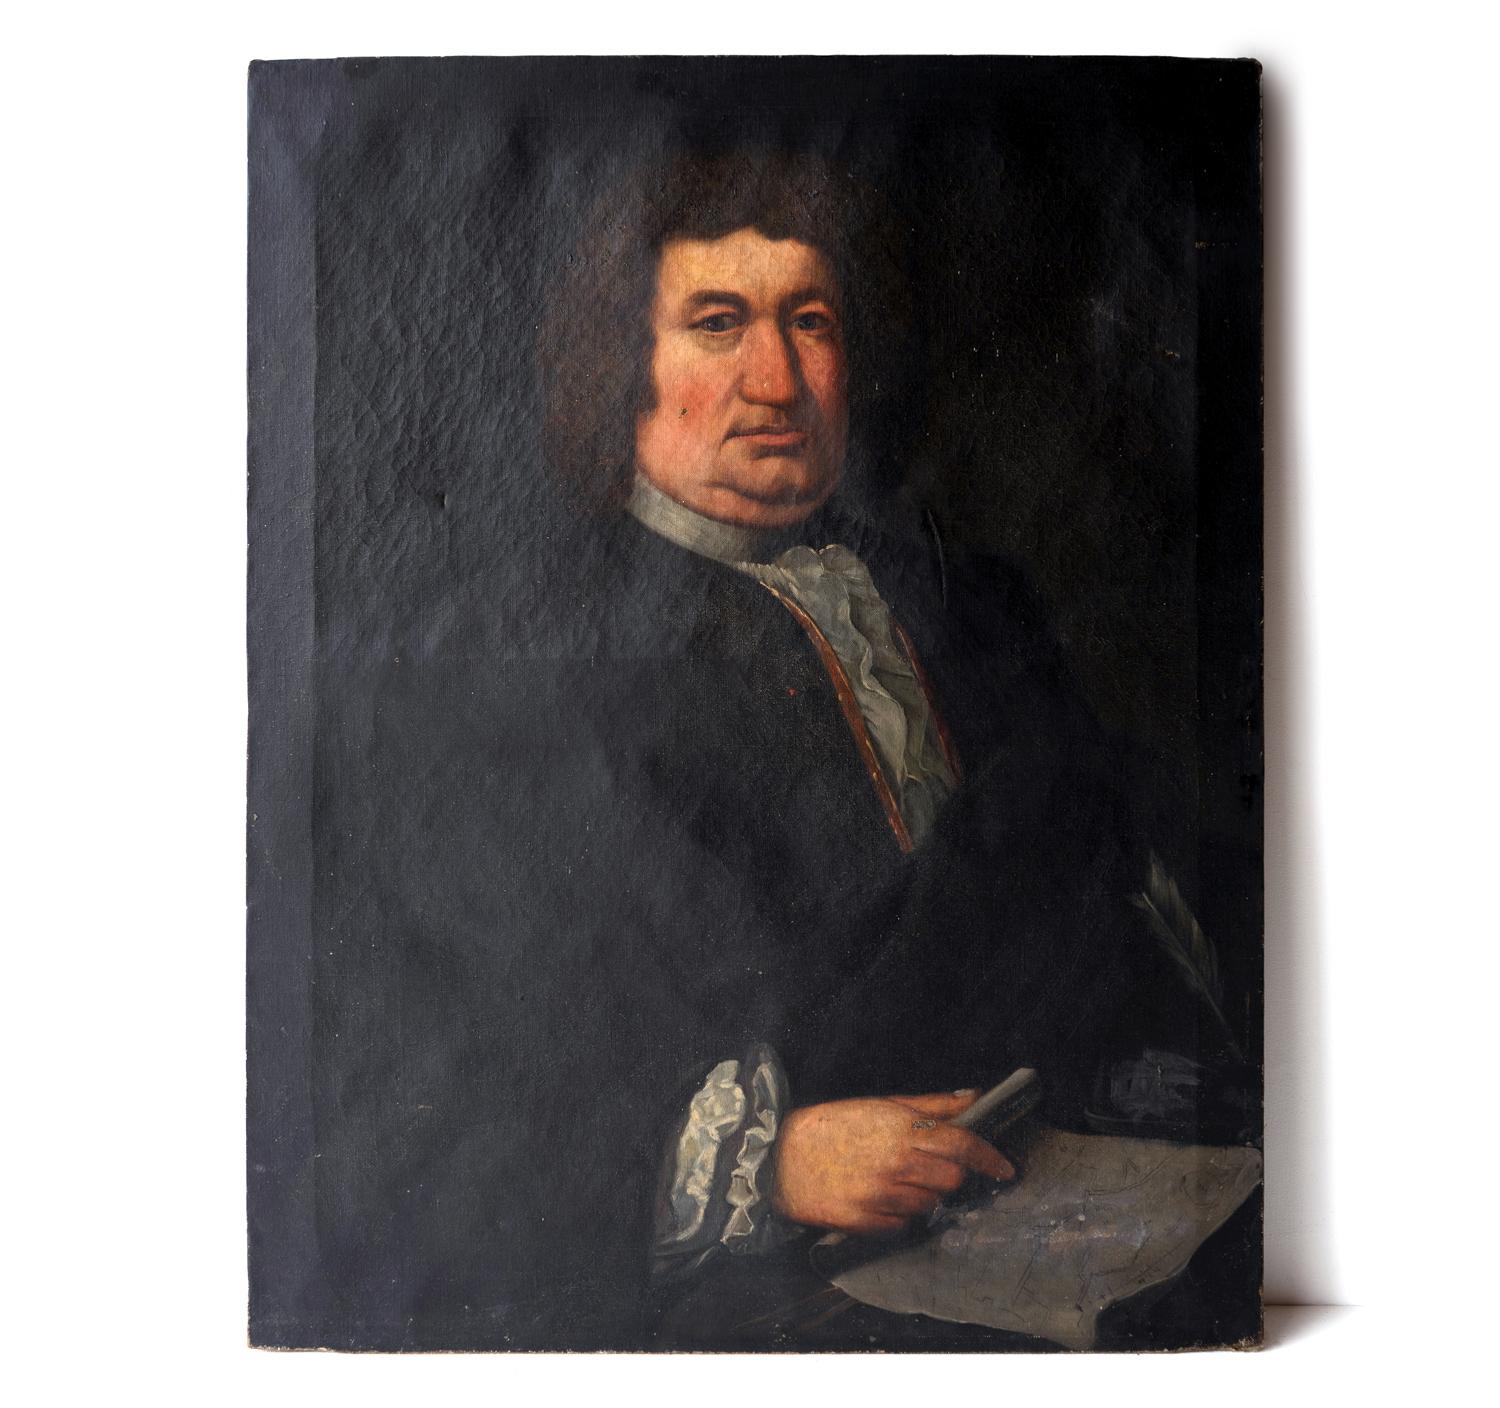 ANTIQUE ORIGINAL OIL ON CANVAS PAINTING DEPICTING A MALE SITTER

Depicting a rather portly man with a characterful face in a curly wig with a flouncy collar and sleeves. He is pointing at a map on his desk alongside a quill probably denting him as a